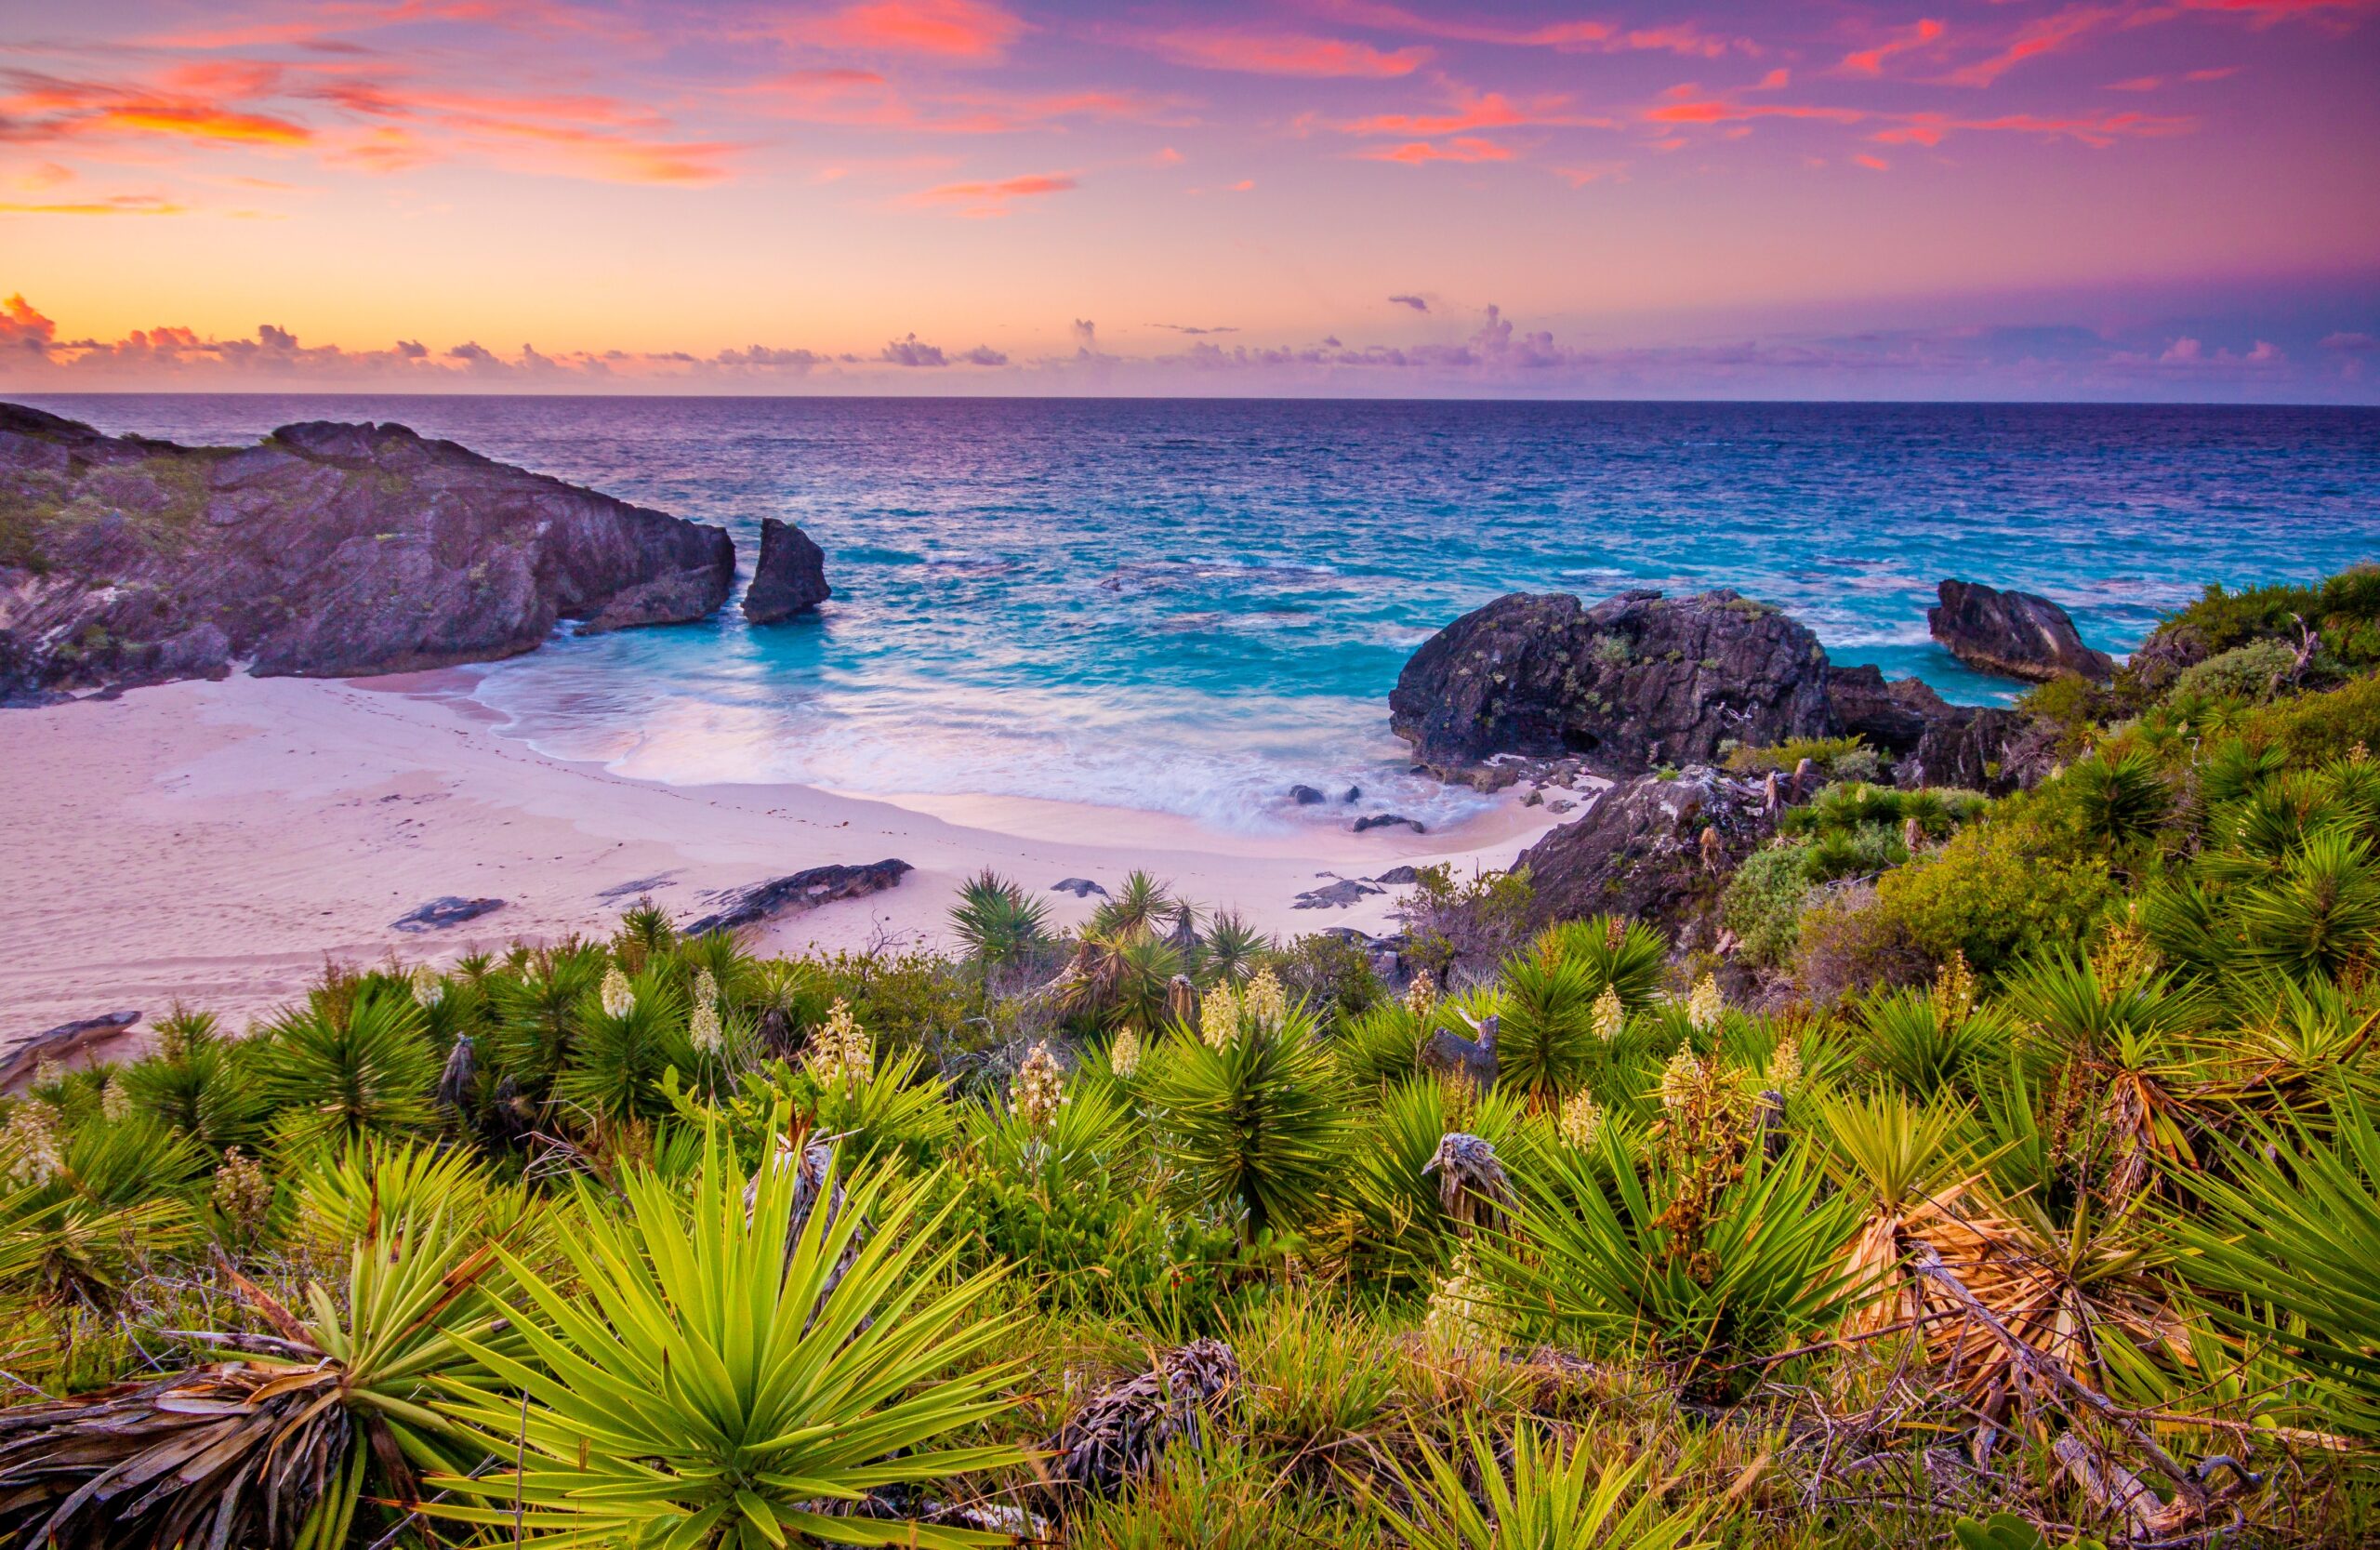 Many travelers love swimming in Bermuda beaches but do not consider if there are lurking dangers.
pictured: a stunning Bermuda beach with green thriving plants near the clear blue waters at sunset